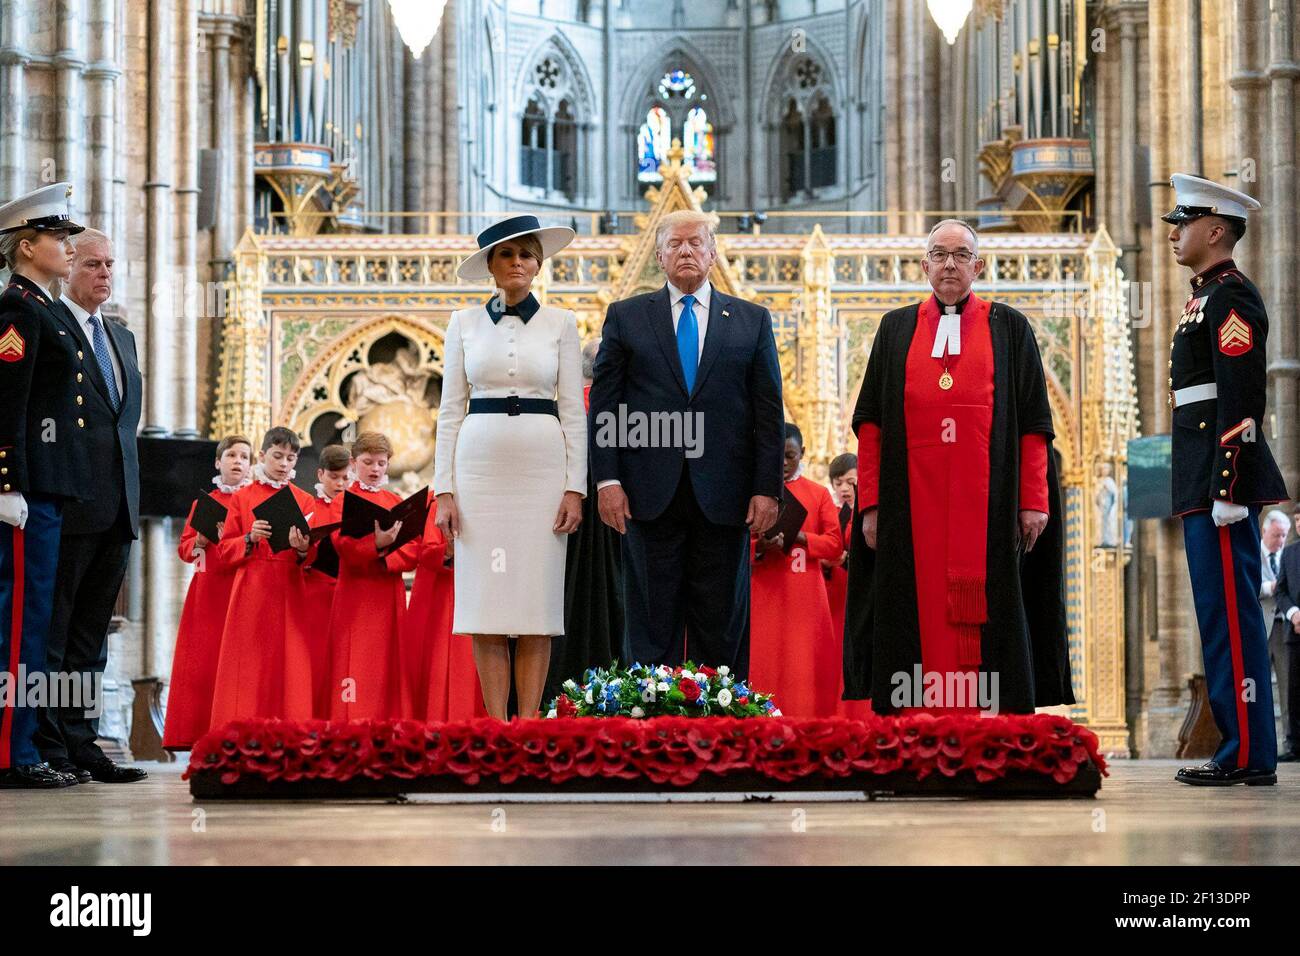 President Donald Trump and First Lady Melania Trump participate in a wreath laying ceremony at the Tomb of the Unknown Warrior Monday June 3 2019 at Westminster Abbey in London. Stock Photo